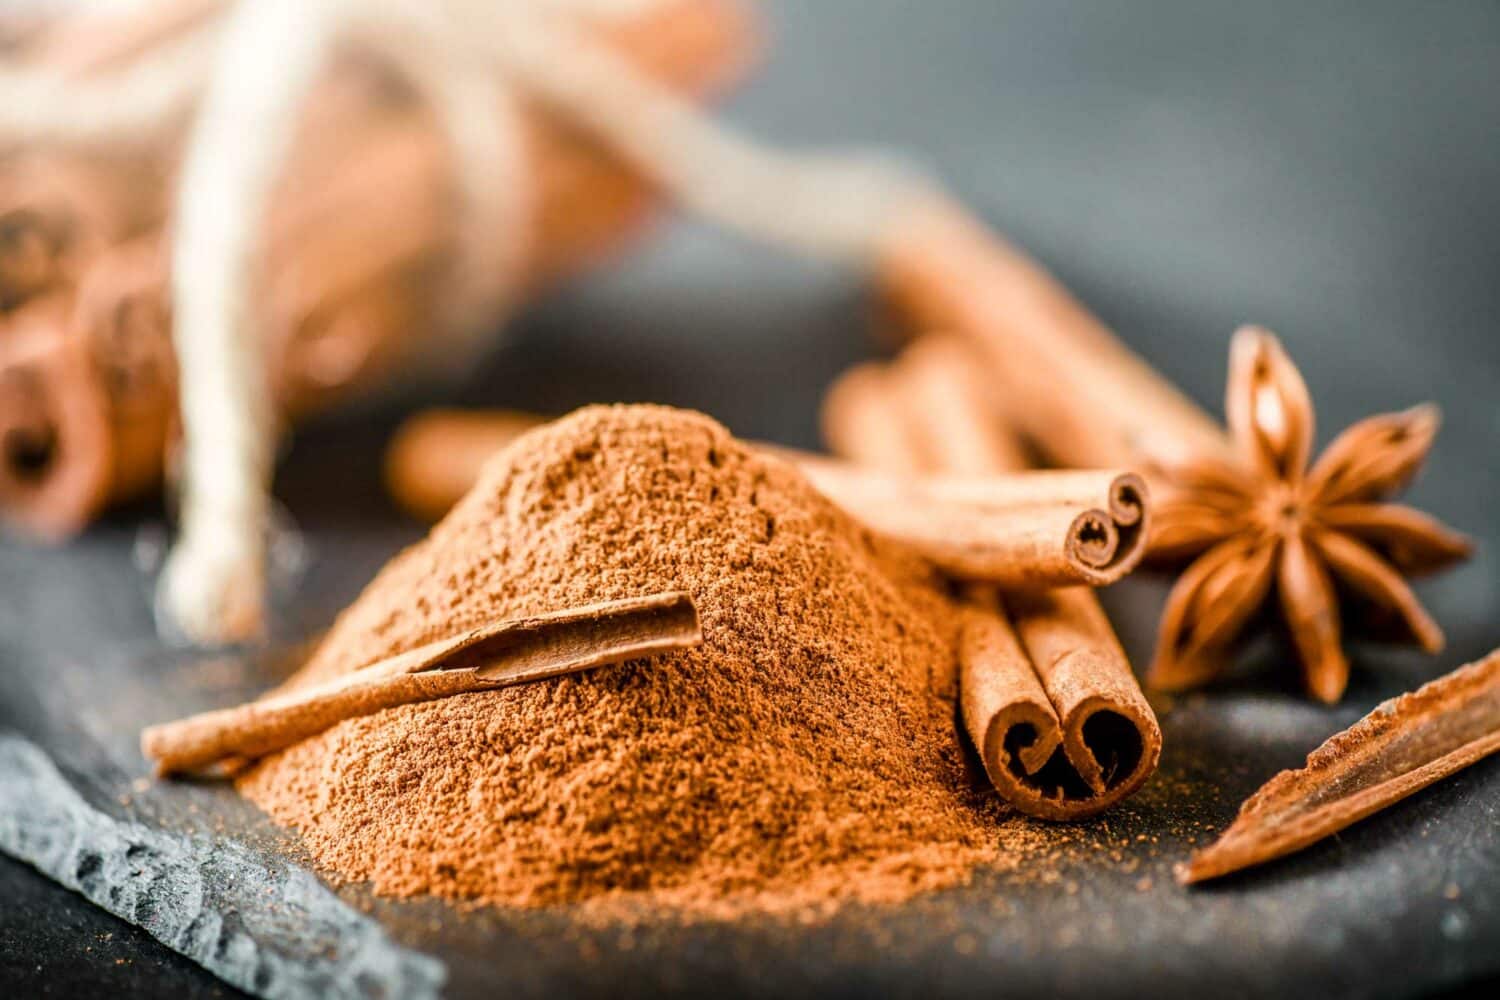 FDA-Screens-Incoming-Shipments-of-Cinnamon-for-Lead-Contamination---as-a-Result-of-Recalled-Apple-Cinnamon-Fruit-Pouches-FDARegulatory-Law-Firm-garg-law.com